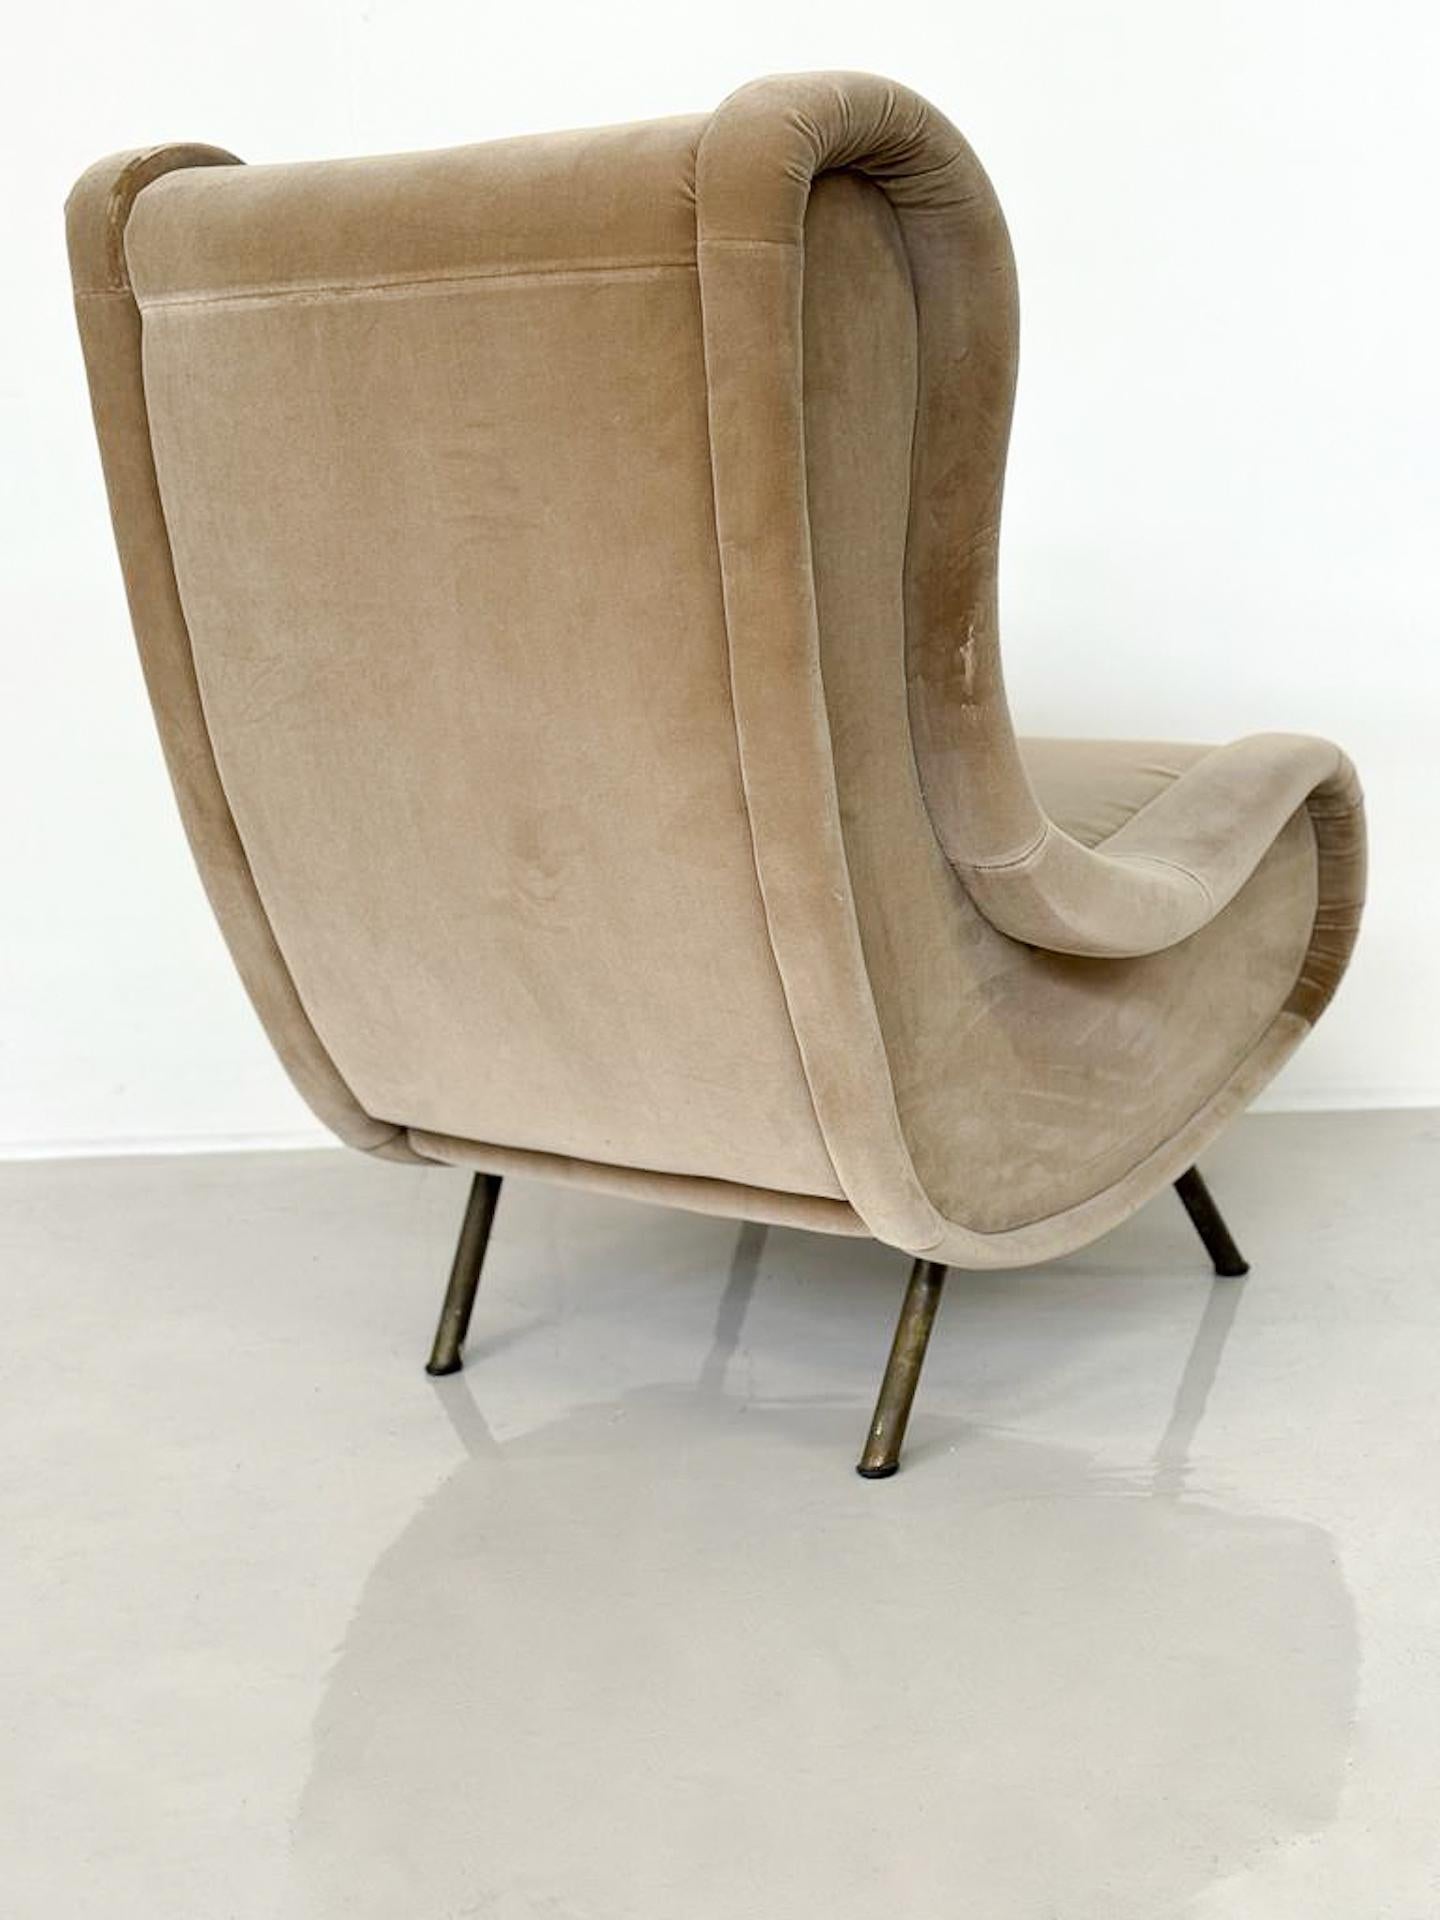 Mid-Century Modern Armchair by Marco Zanuso, Italy, 1960s - New Upholstery In Good Condition For Sale In Brussels, BE